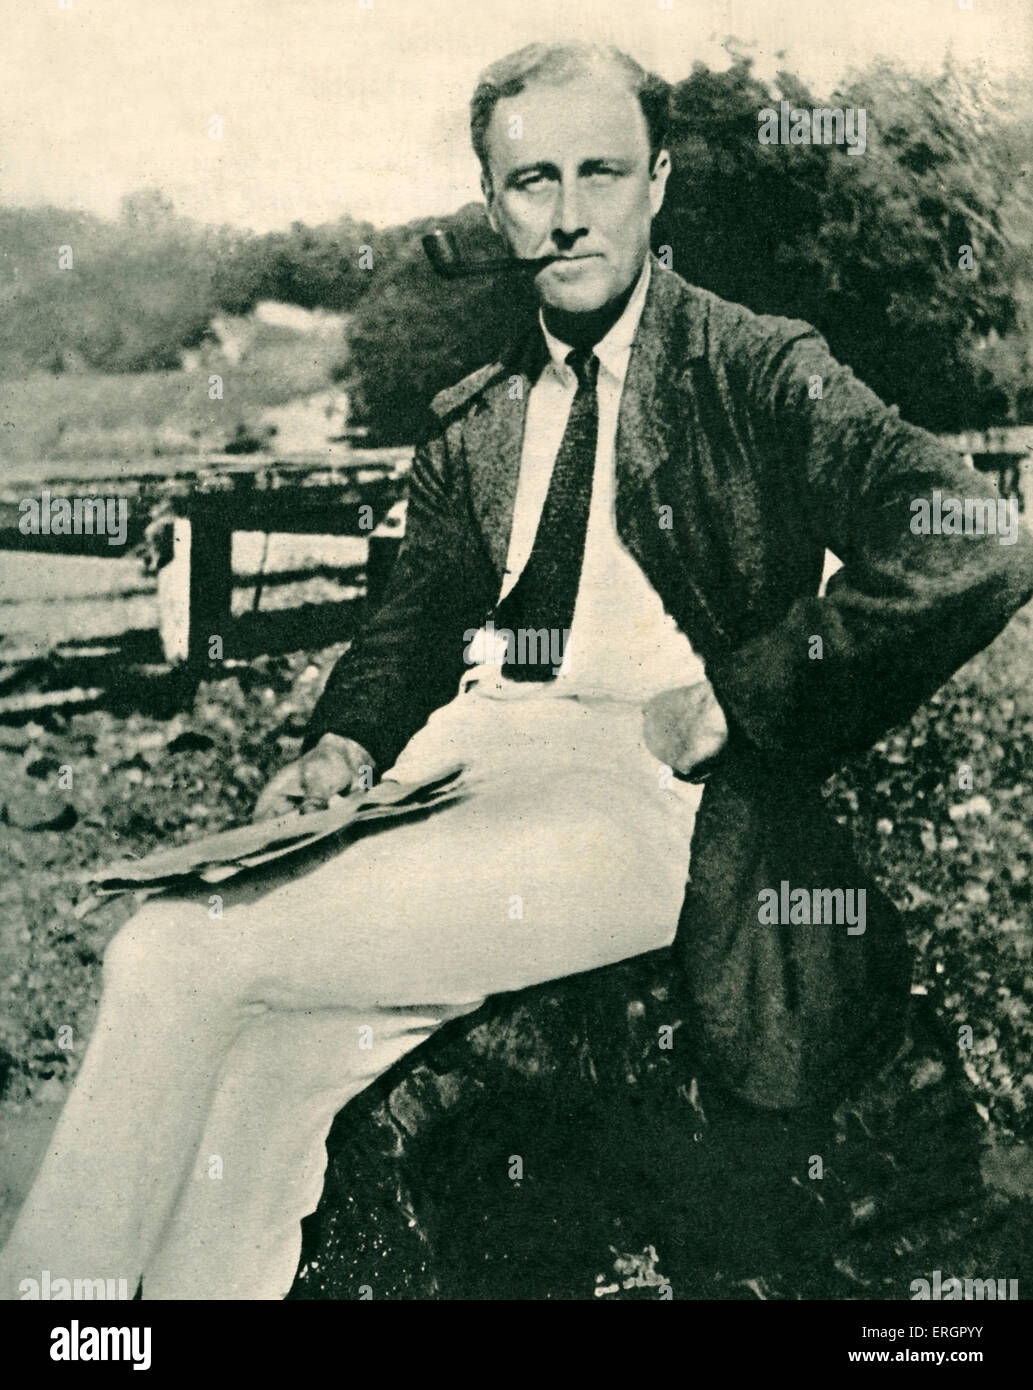 Franklin D. Roosevelt at Campobello Island, portrait.  FDR: 32nd President of the United States (1933–1945), led the US during Stock Photo